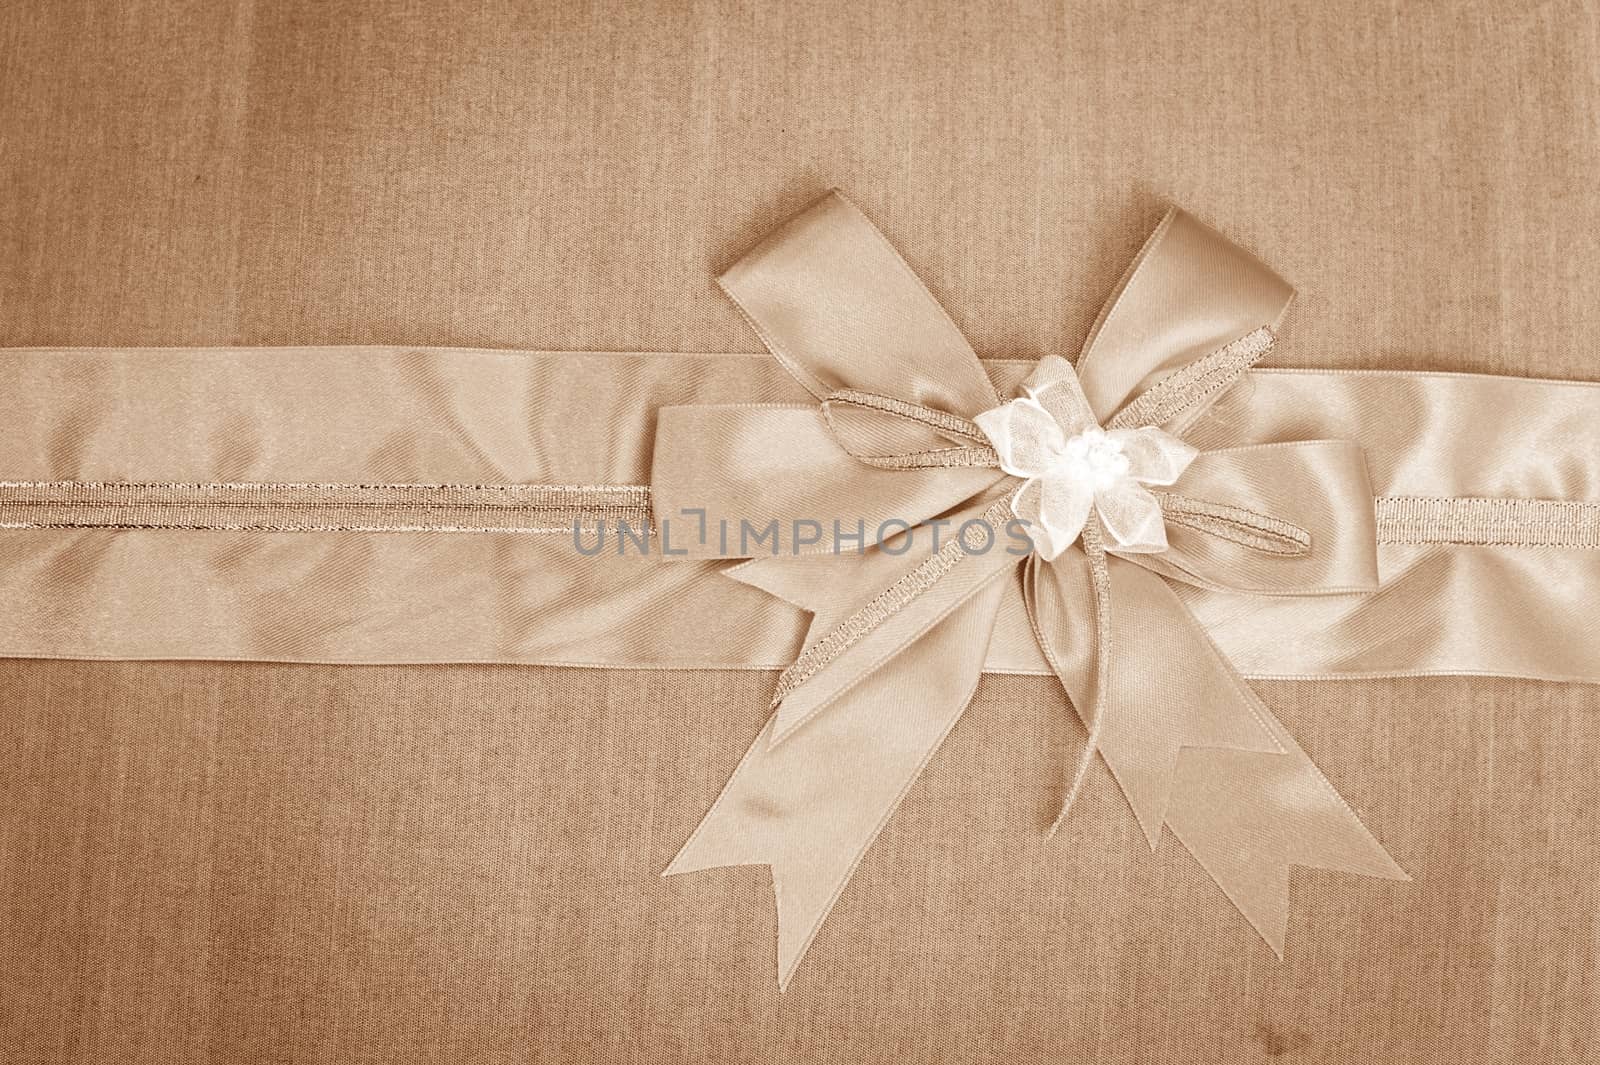 Abstract ribbon bow on fabric background.  by ngungfoto